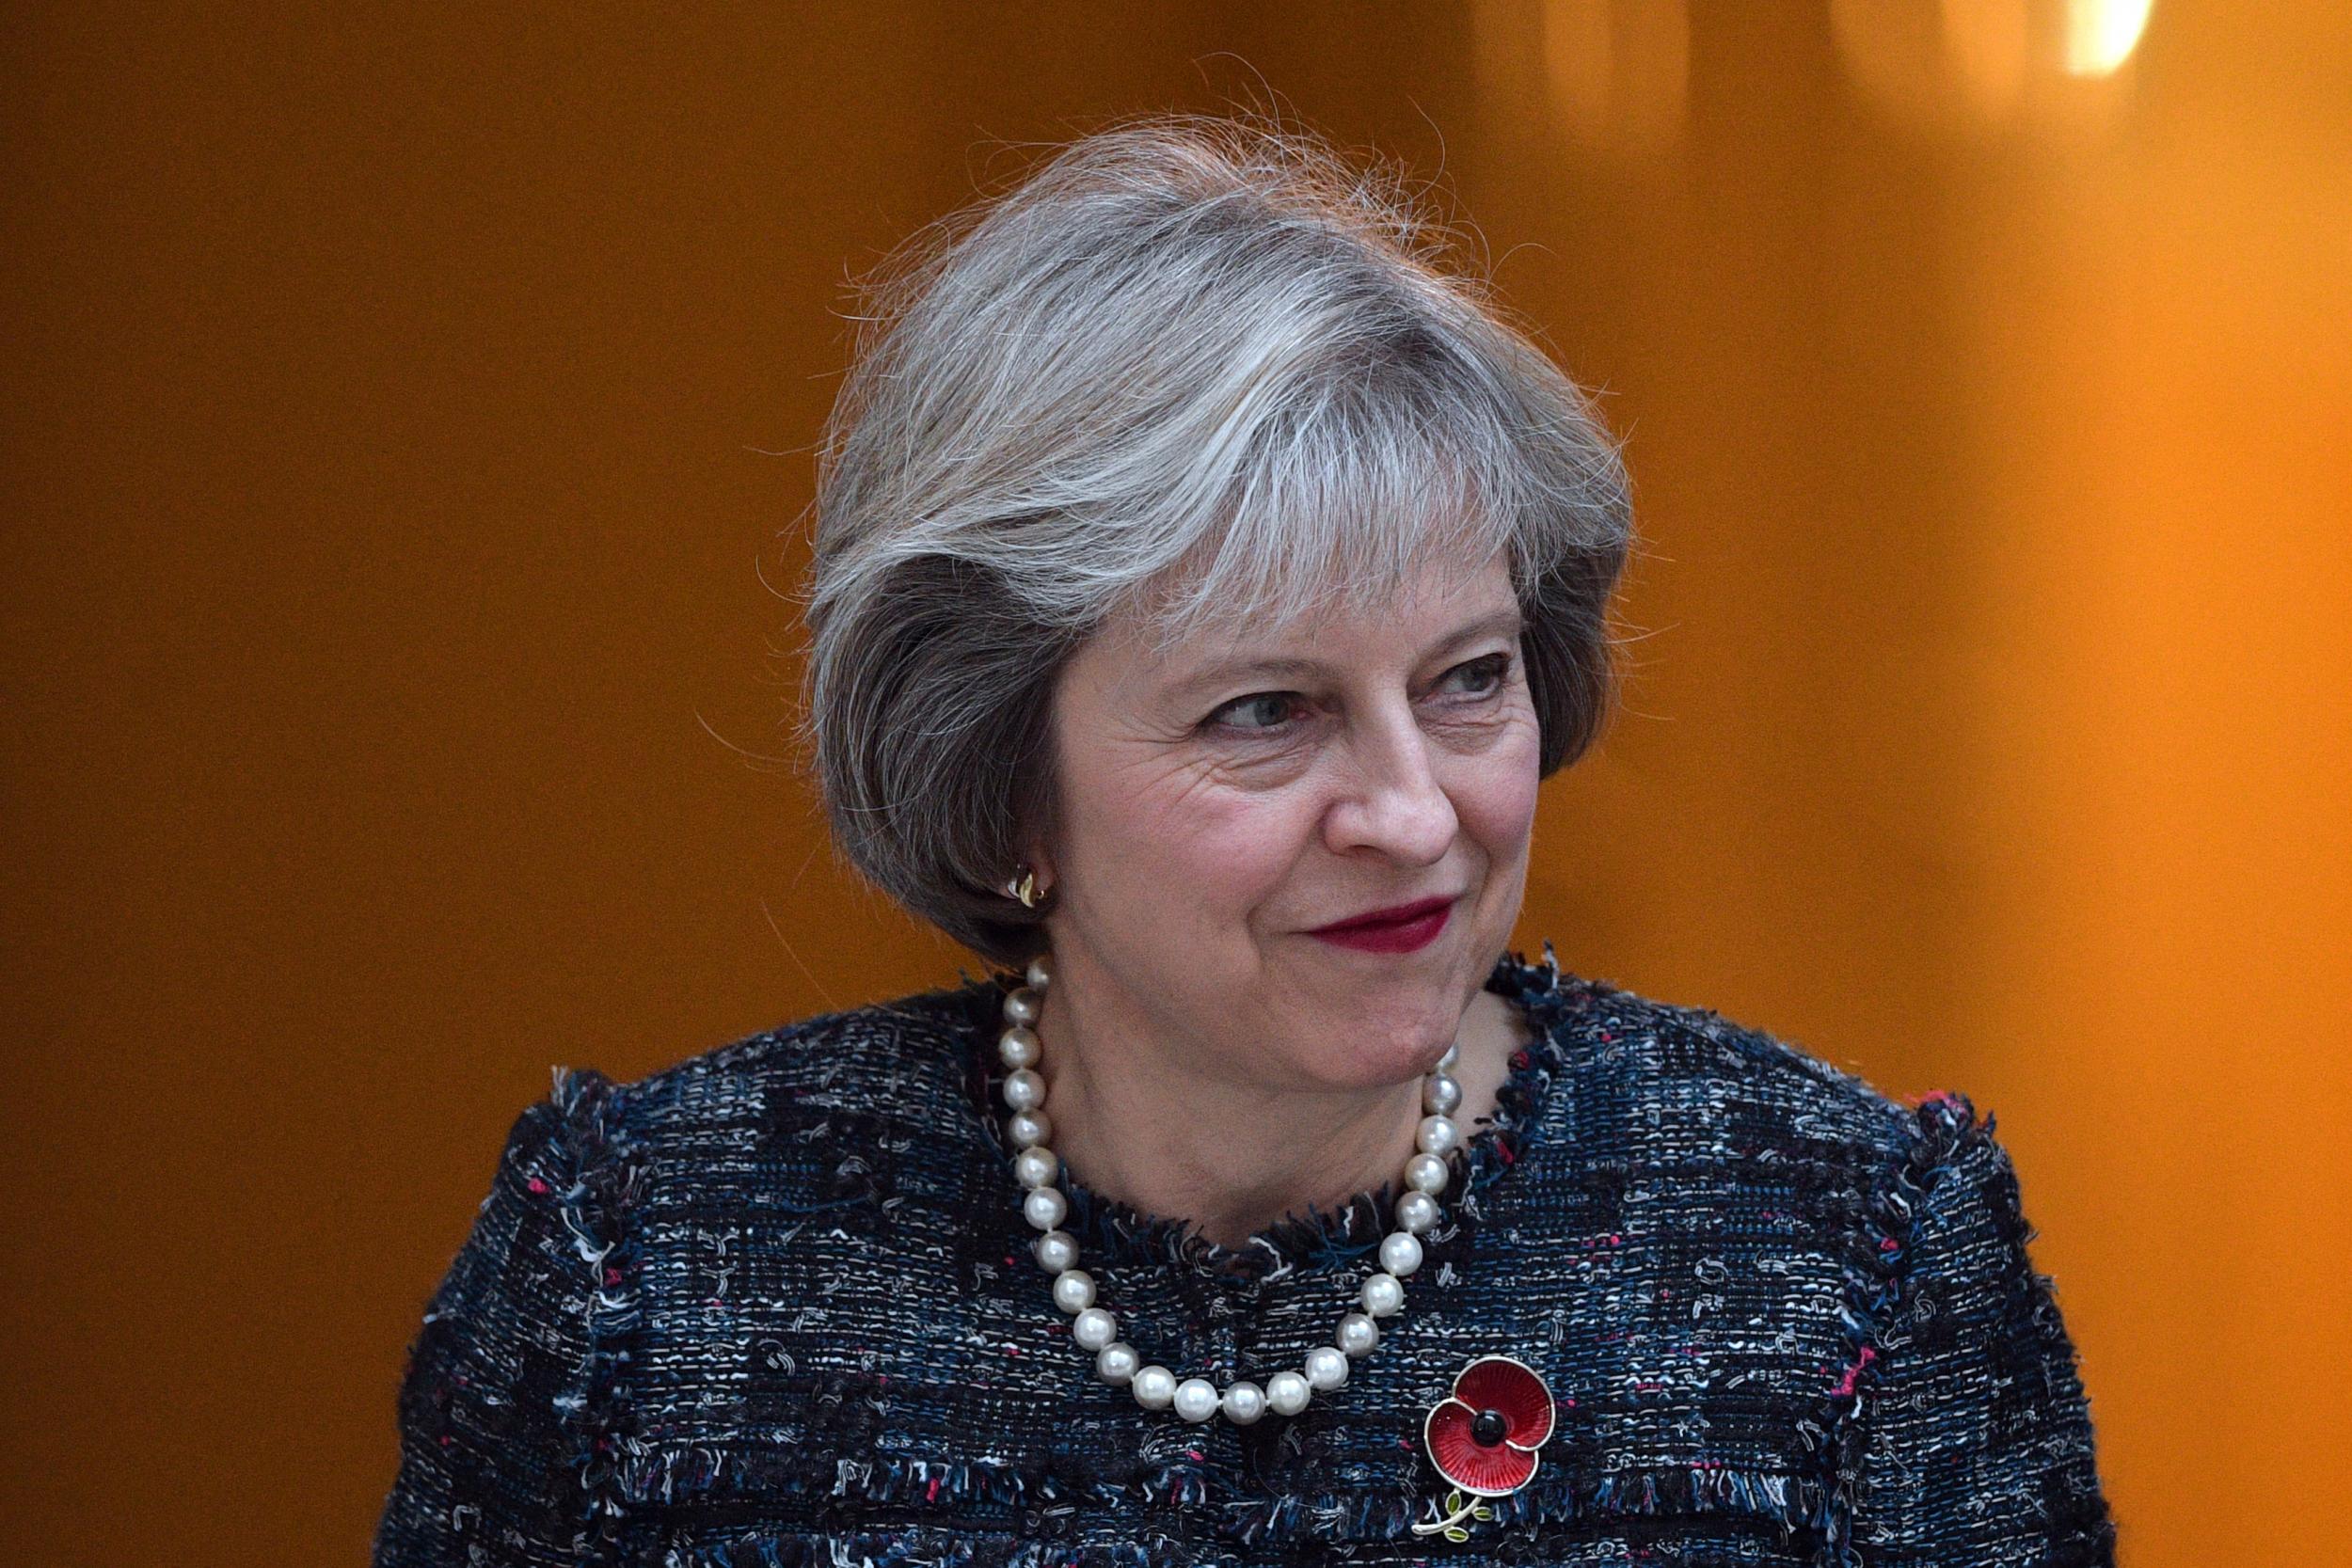 Just 20 per cent agreed the Prime Minister would get the European Union’s approval on her proposal